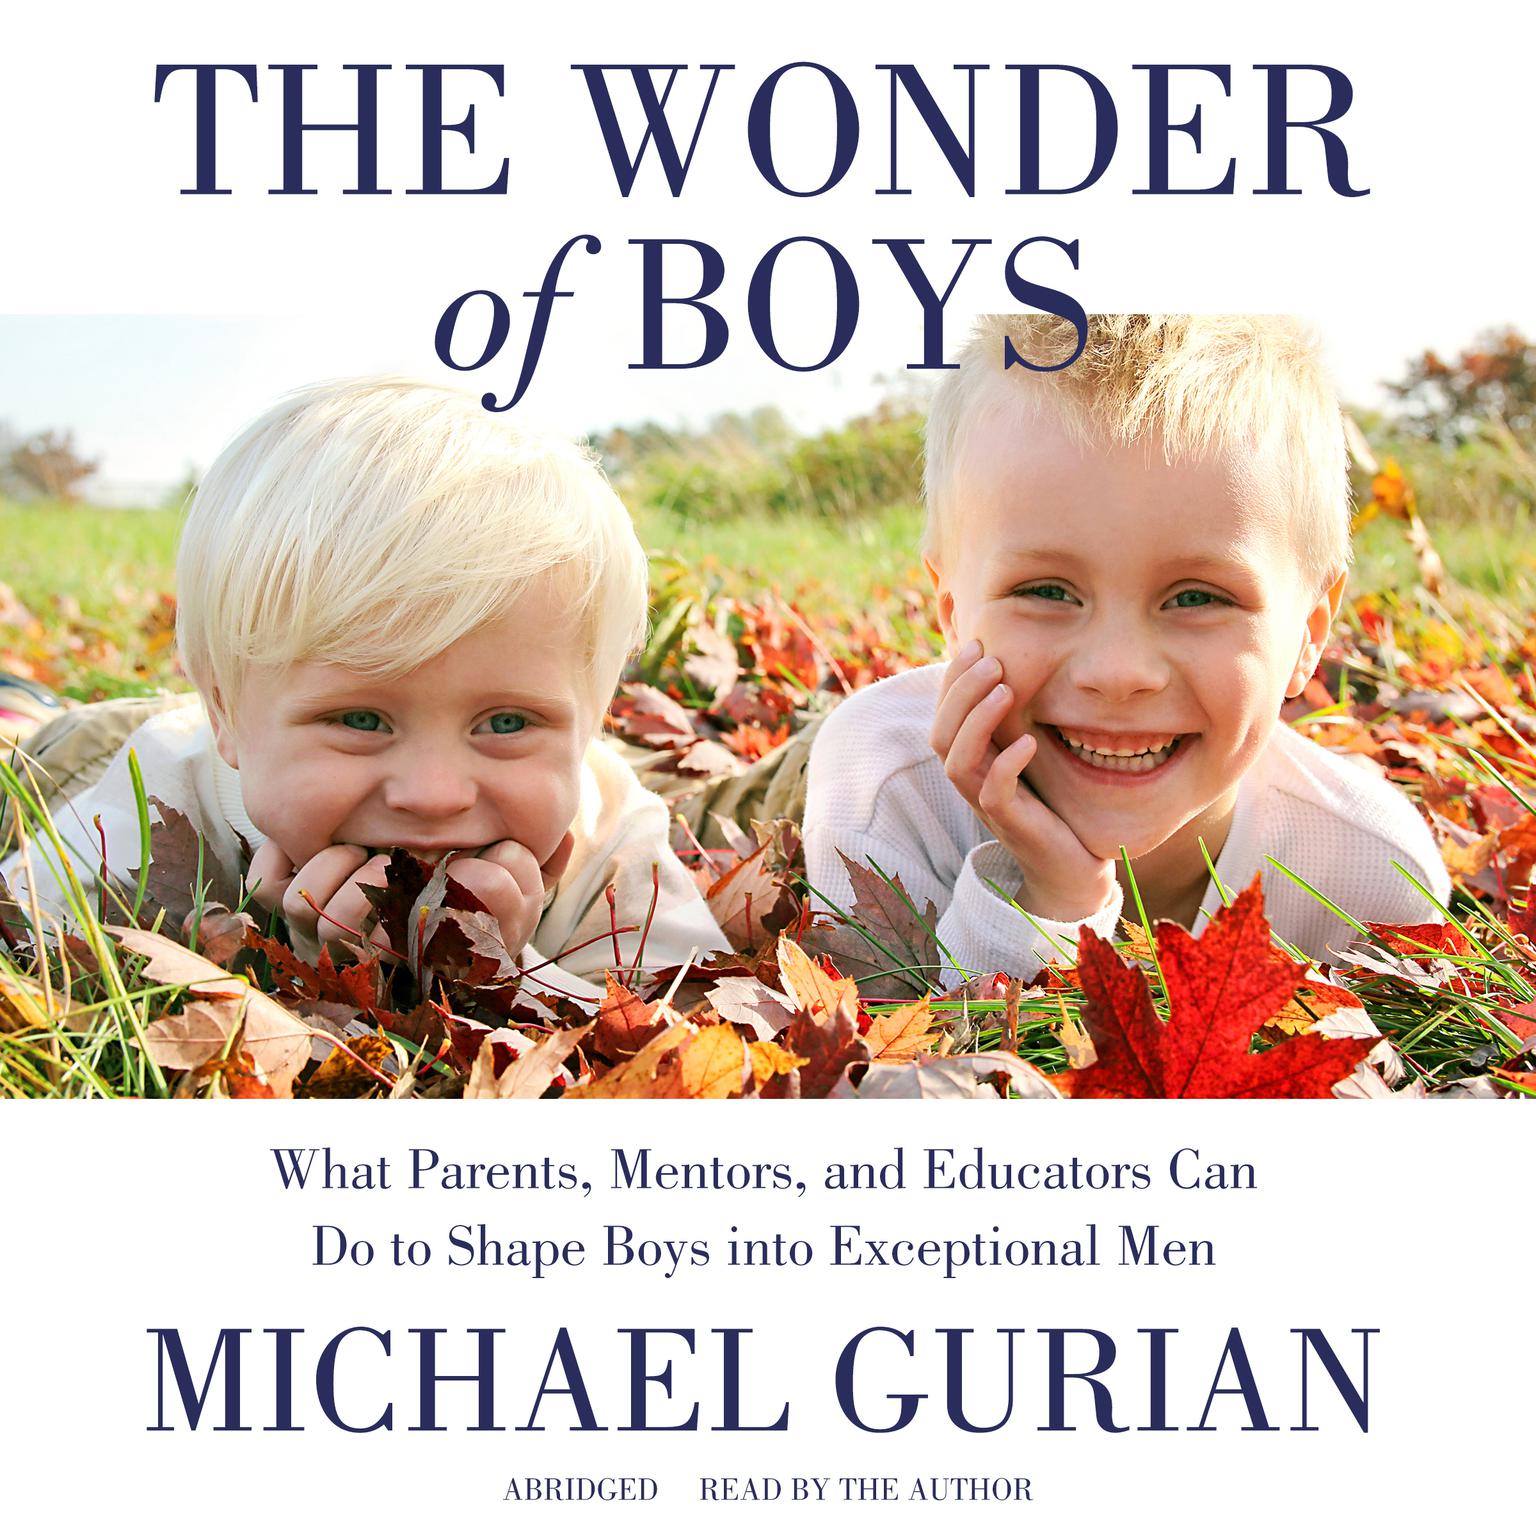 The Wonder of Boys (Abridged): What Parents, Mentors, and Educators Can Do to Shape Boys into Exceptional Men Audiobook, by Michael Gurian